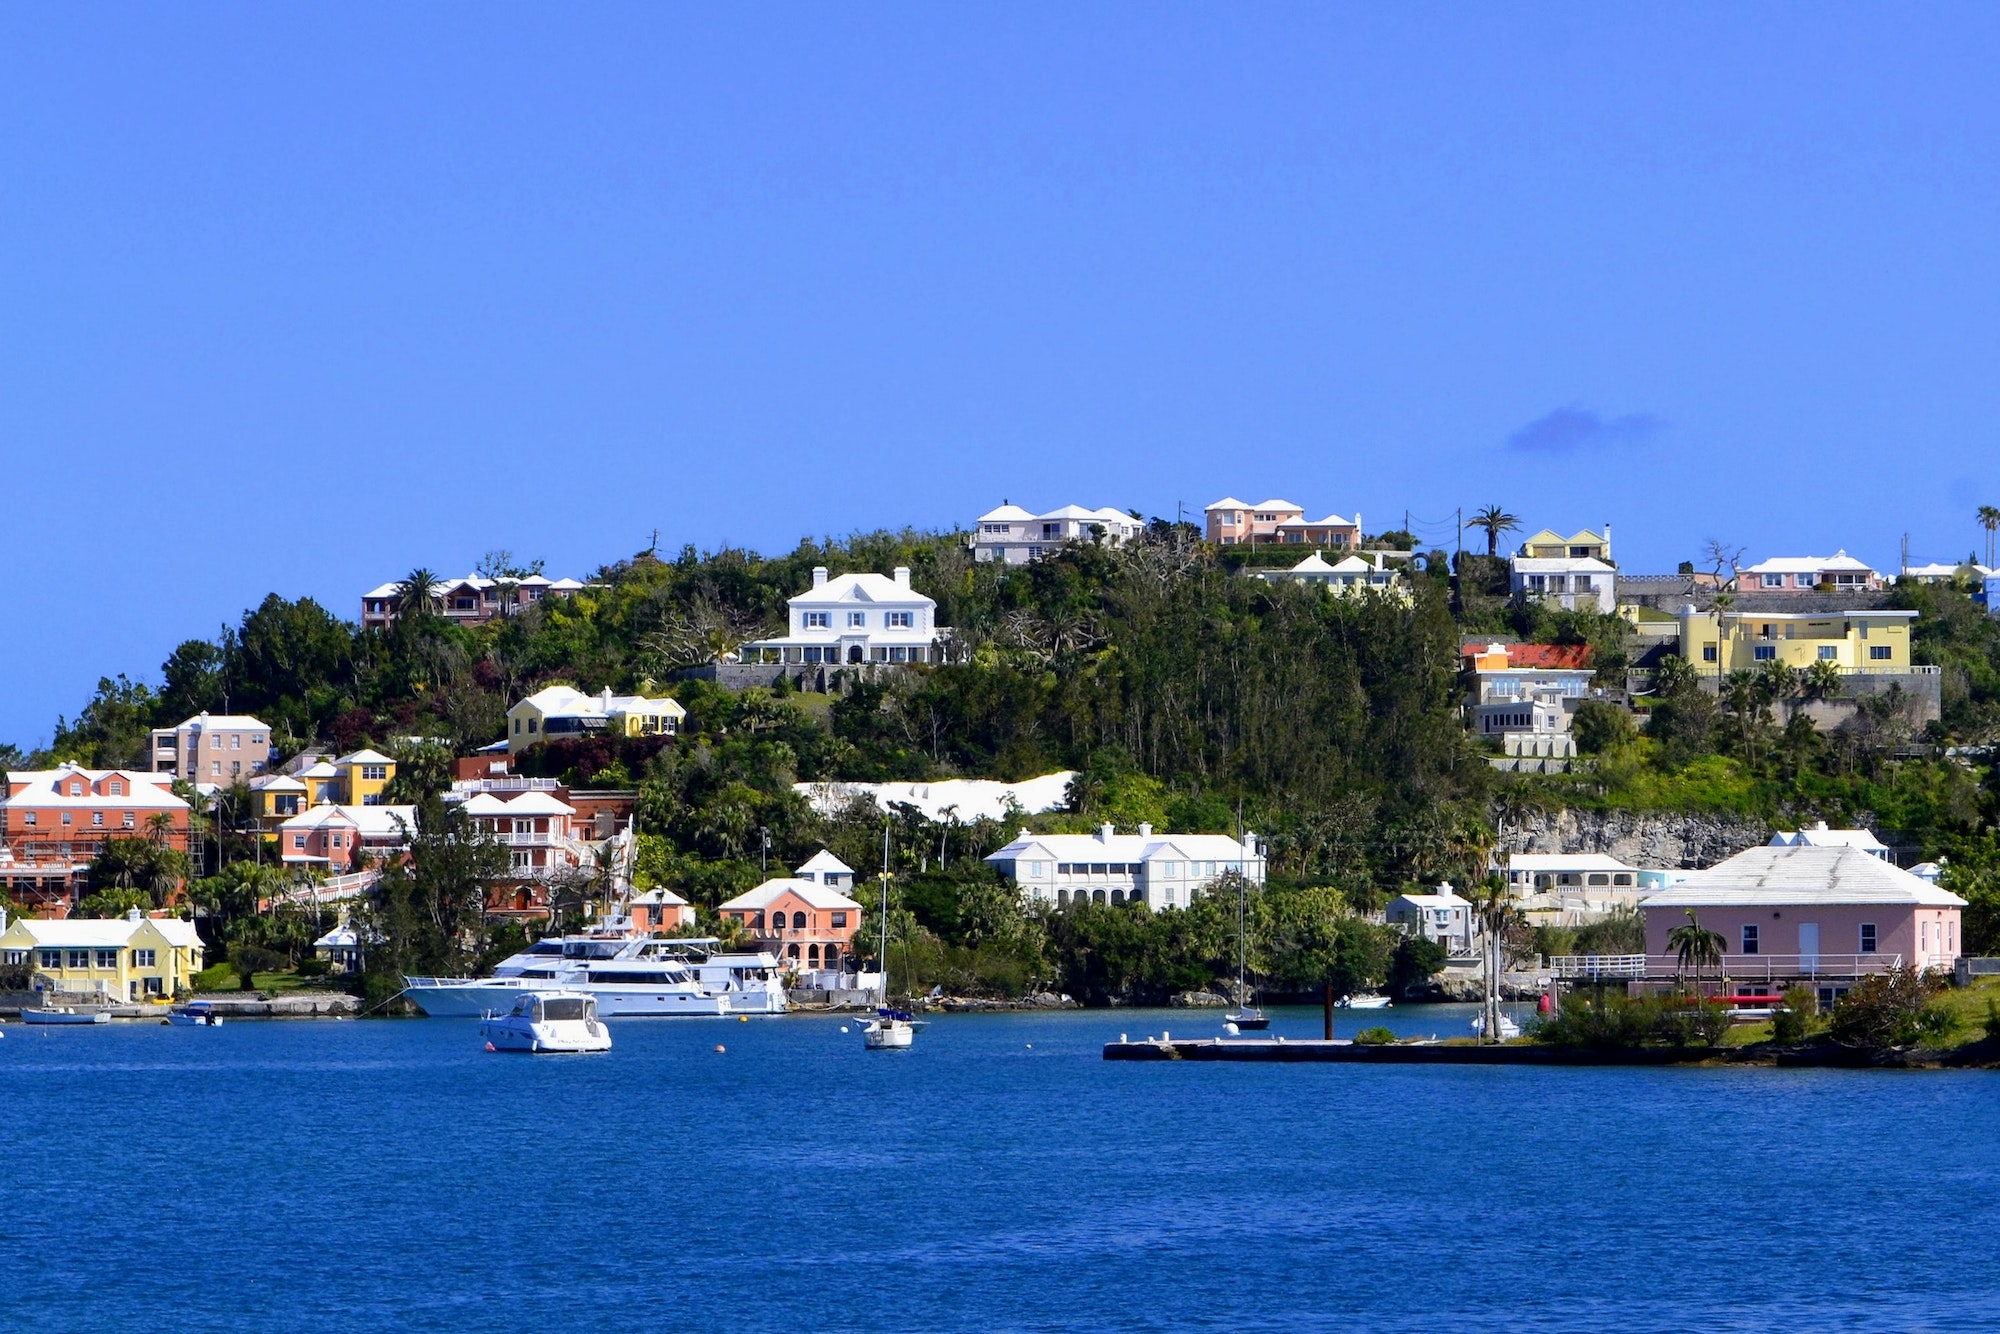 Colorful pastel buildings in the port town of Hamilton on the island of Bermuda